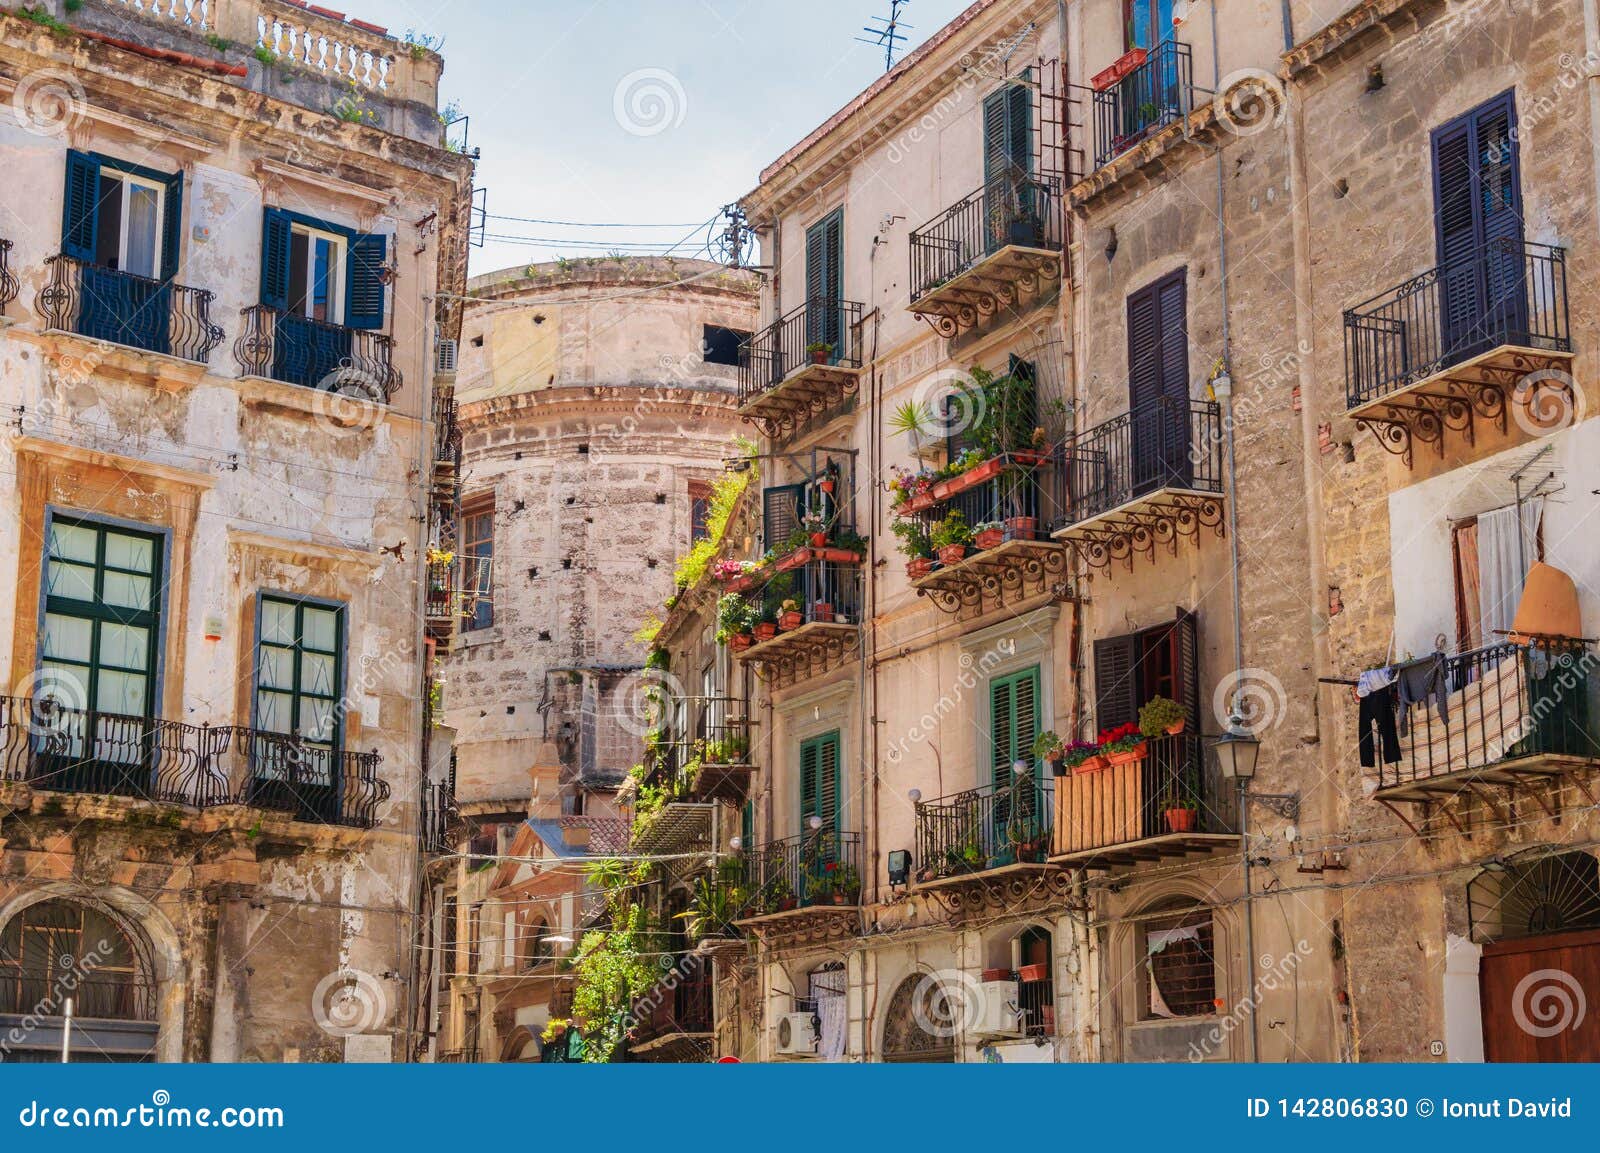 palermo,sicilia, italy: street view of the old buildings